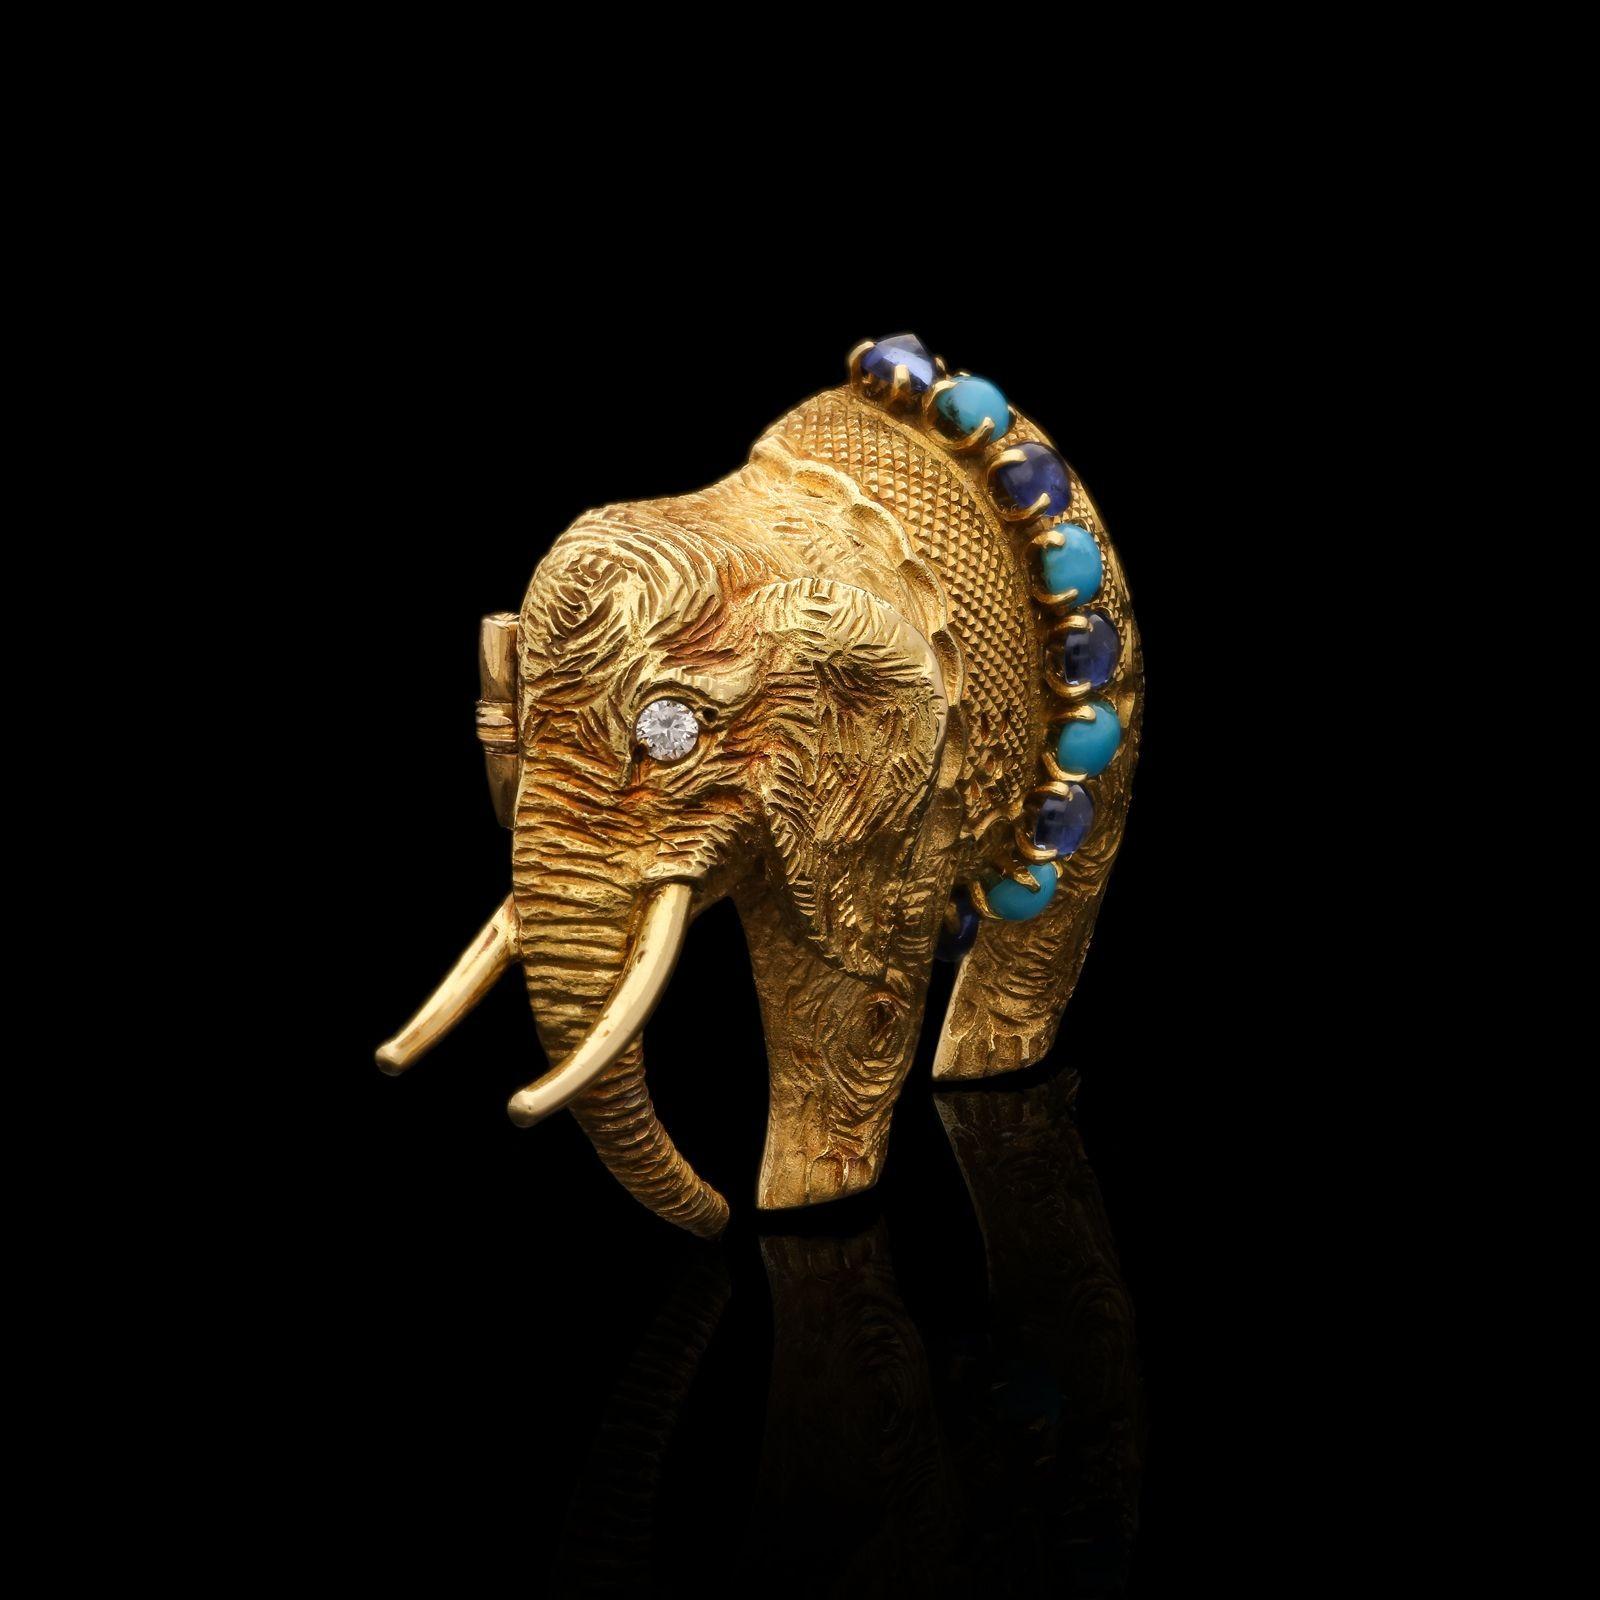 A charming gold elephant brooch by Hermès c.1960s, the three-dimensional brooch finely modelled in 18ct yellow gold as an elephant standing sideways and wearing a decorative blanket, all carefully textured to depict the elephant’s skin and woven